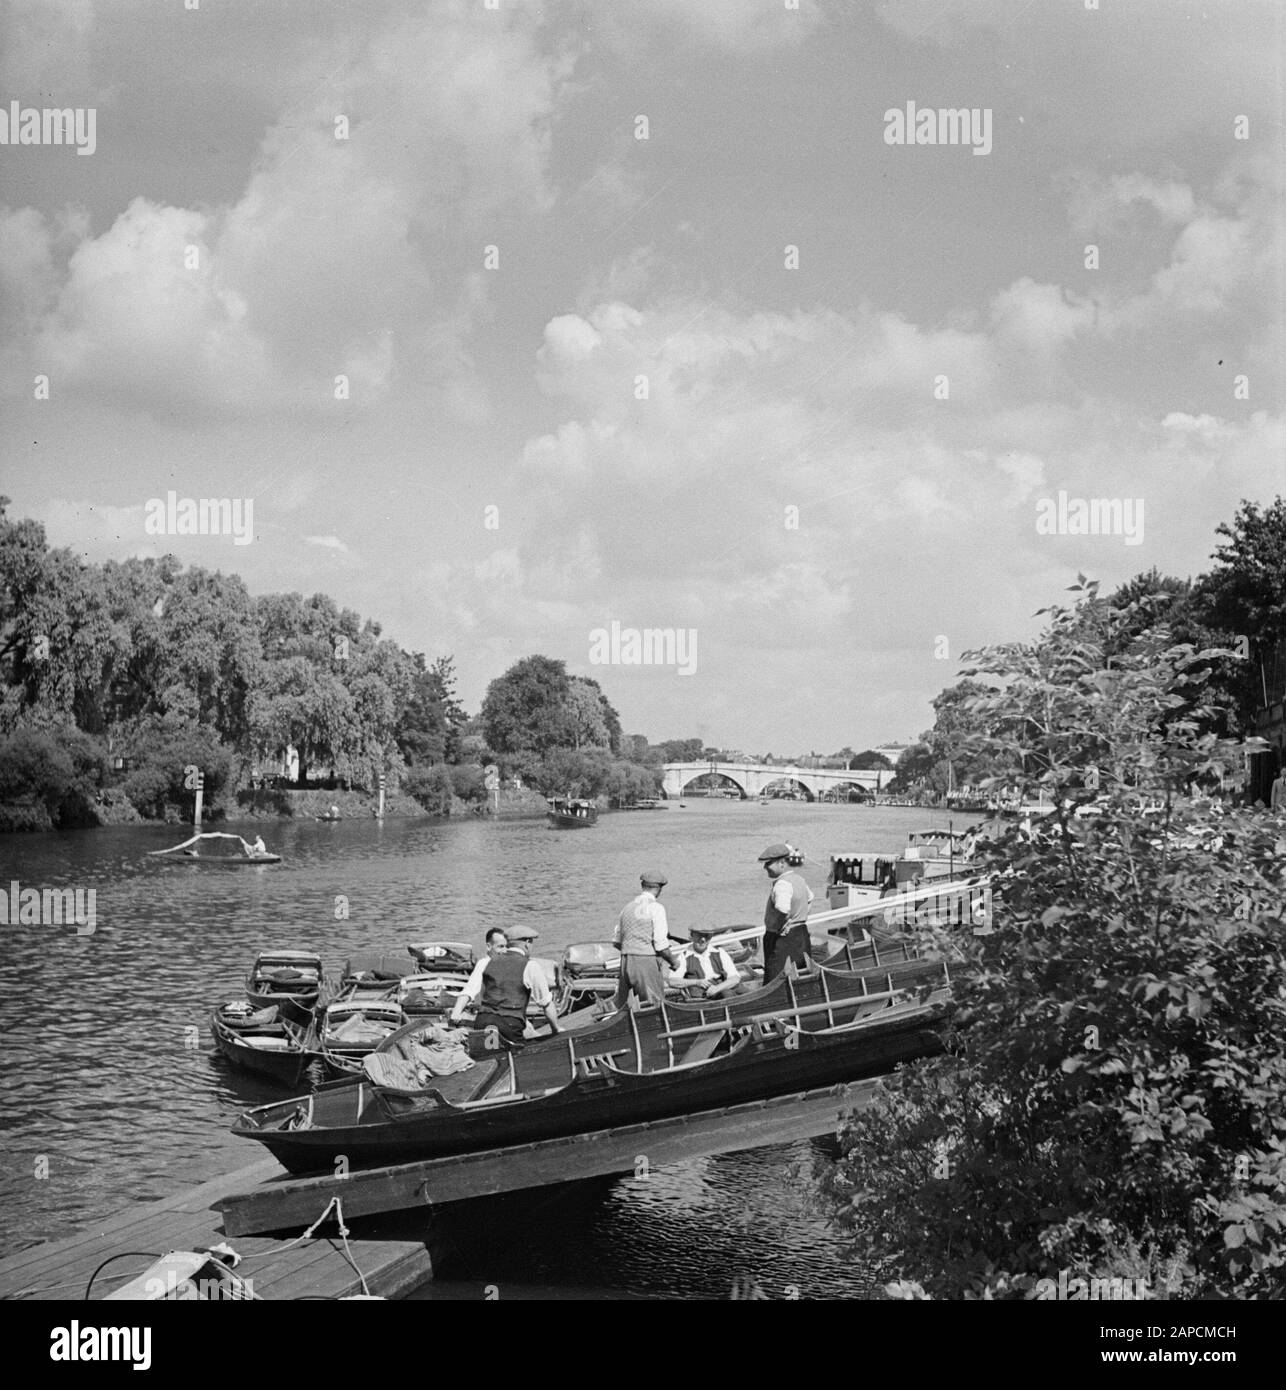 Bank Holiday Description: Boating for rowing boats in the River Thames Annotation: 'Bank Holiday' is the English word for a day when banks and public institutions are closed and many people are free Date: 1947 Location: England, London Keywords: rivers, rowing boats Stock Photo